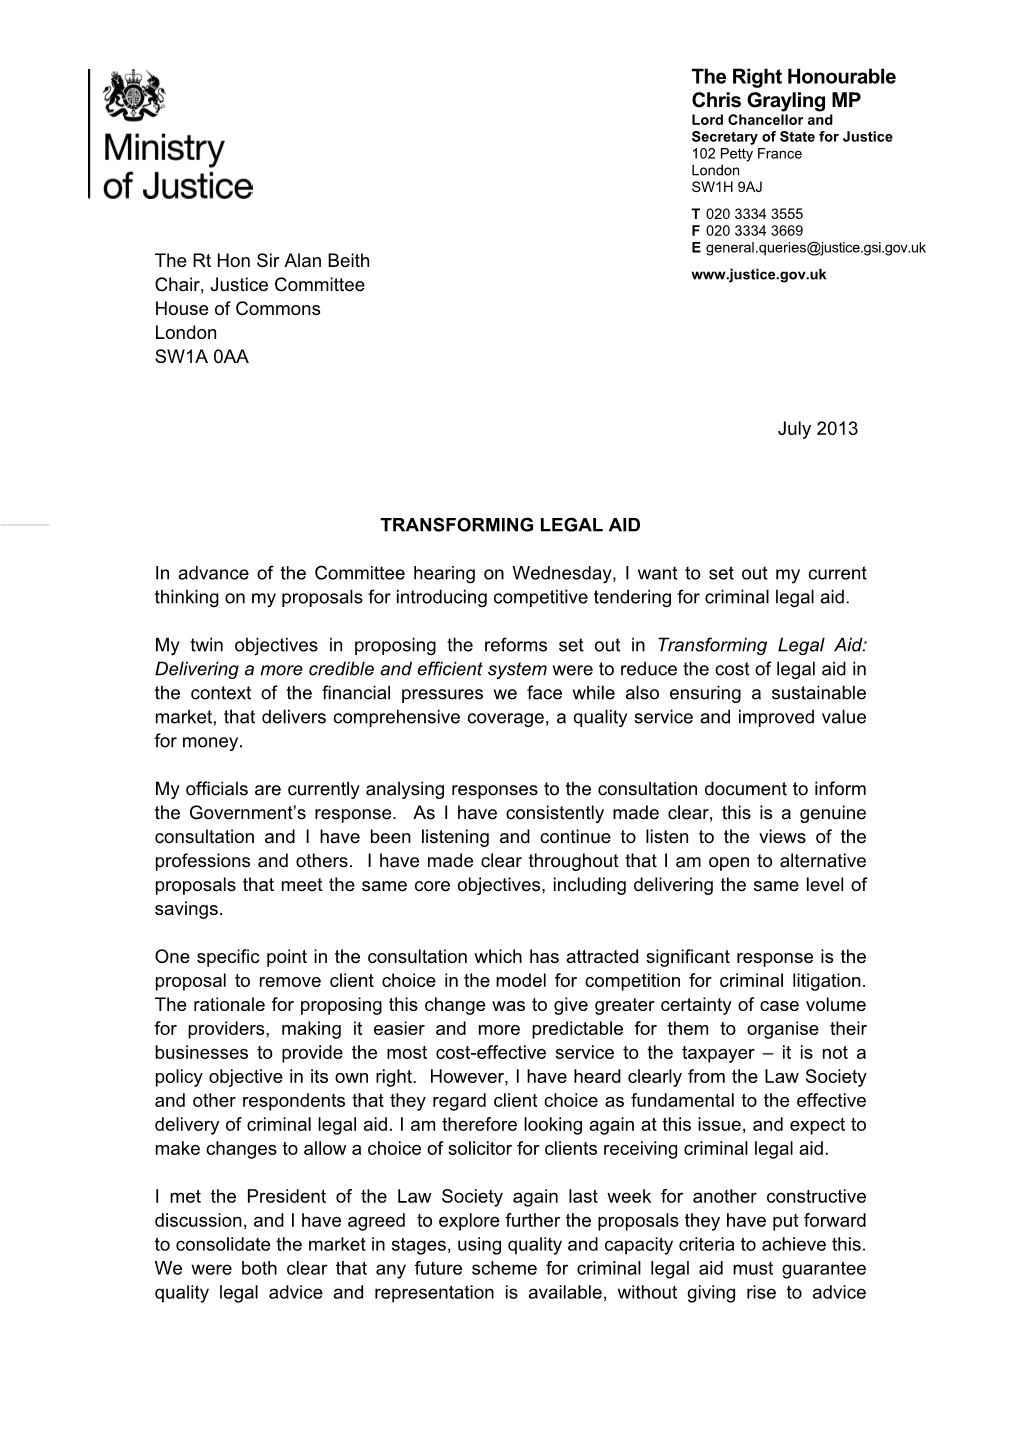 Chris Grayling Letter on Transforming Legal